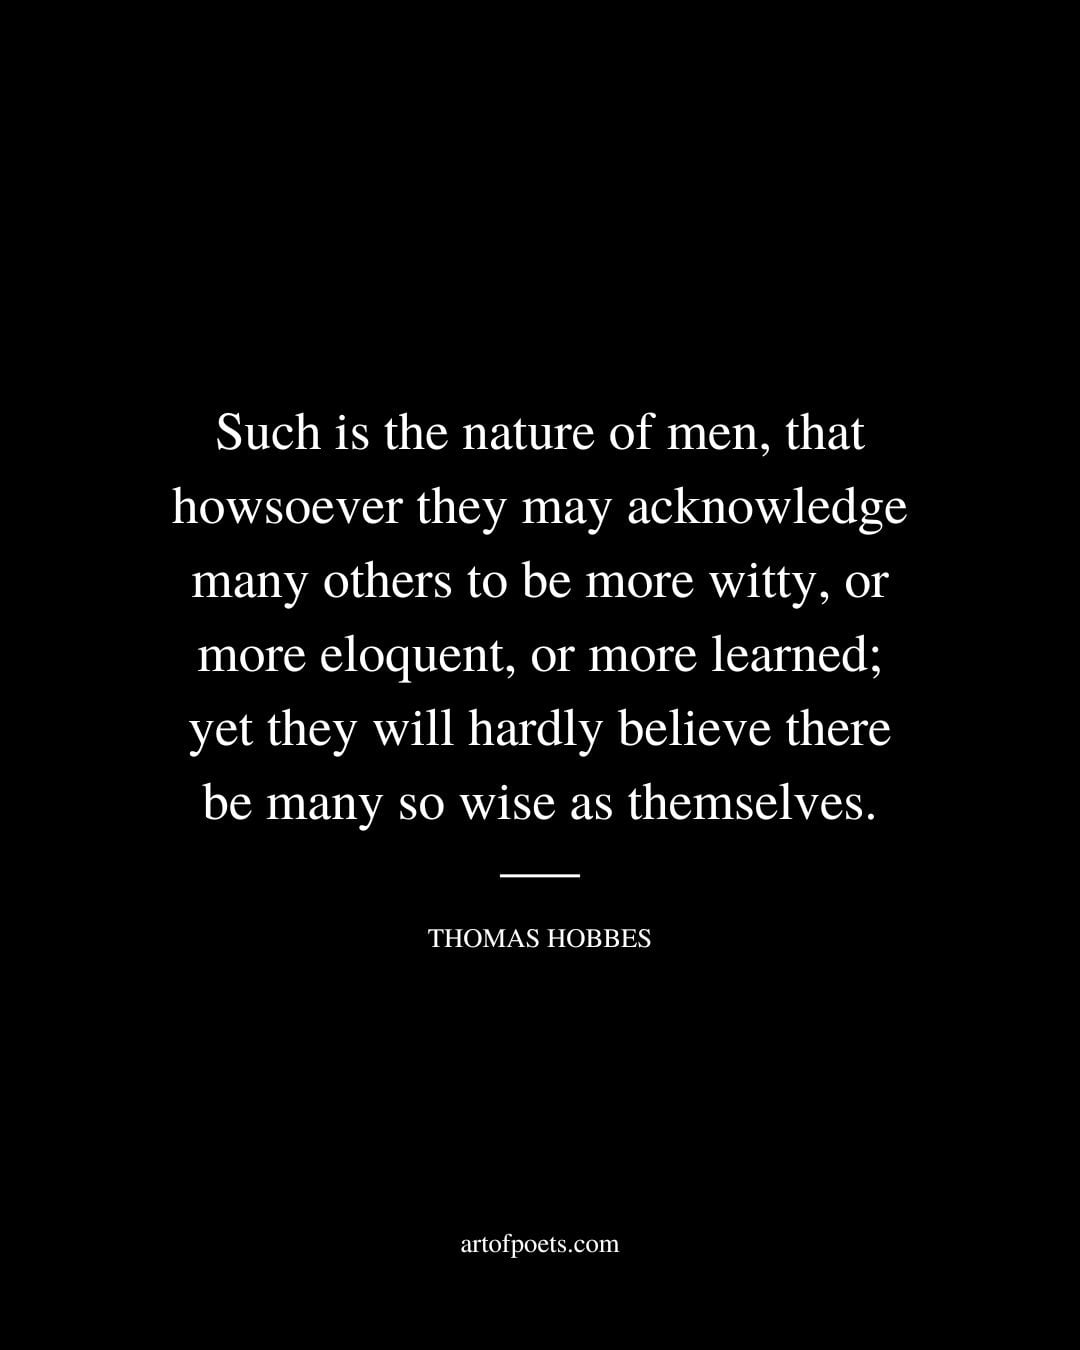 Such is the nature of men that howsoever they may acknowledge many others to be more witty or more eloquent or more learned